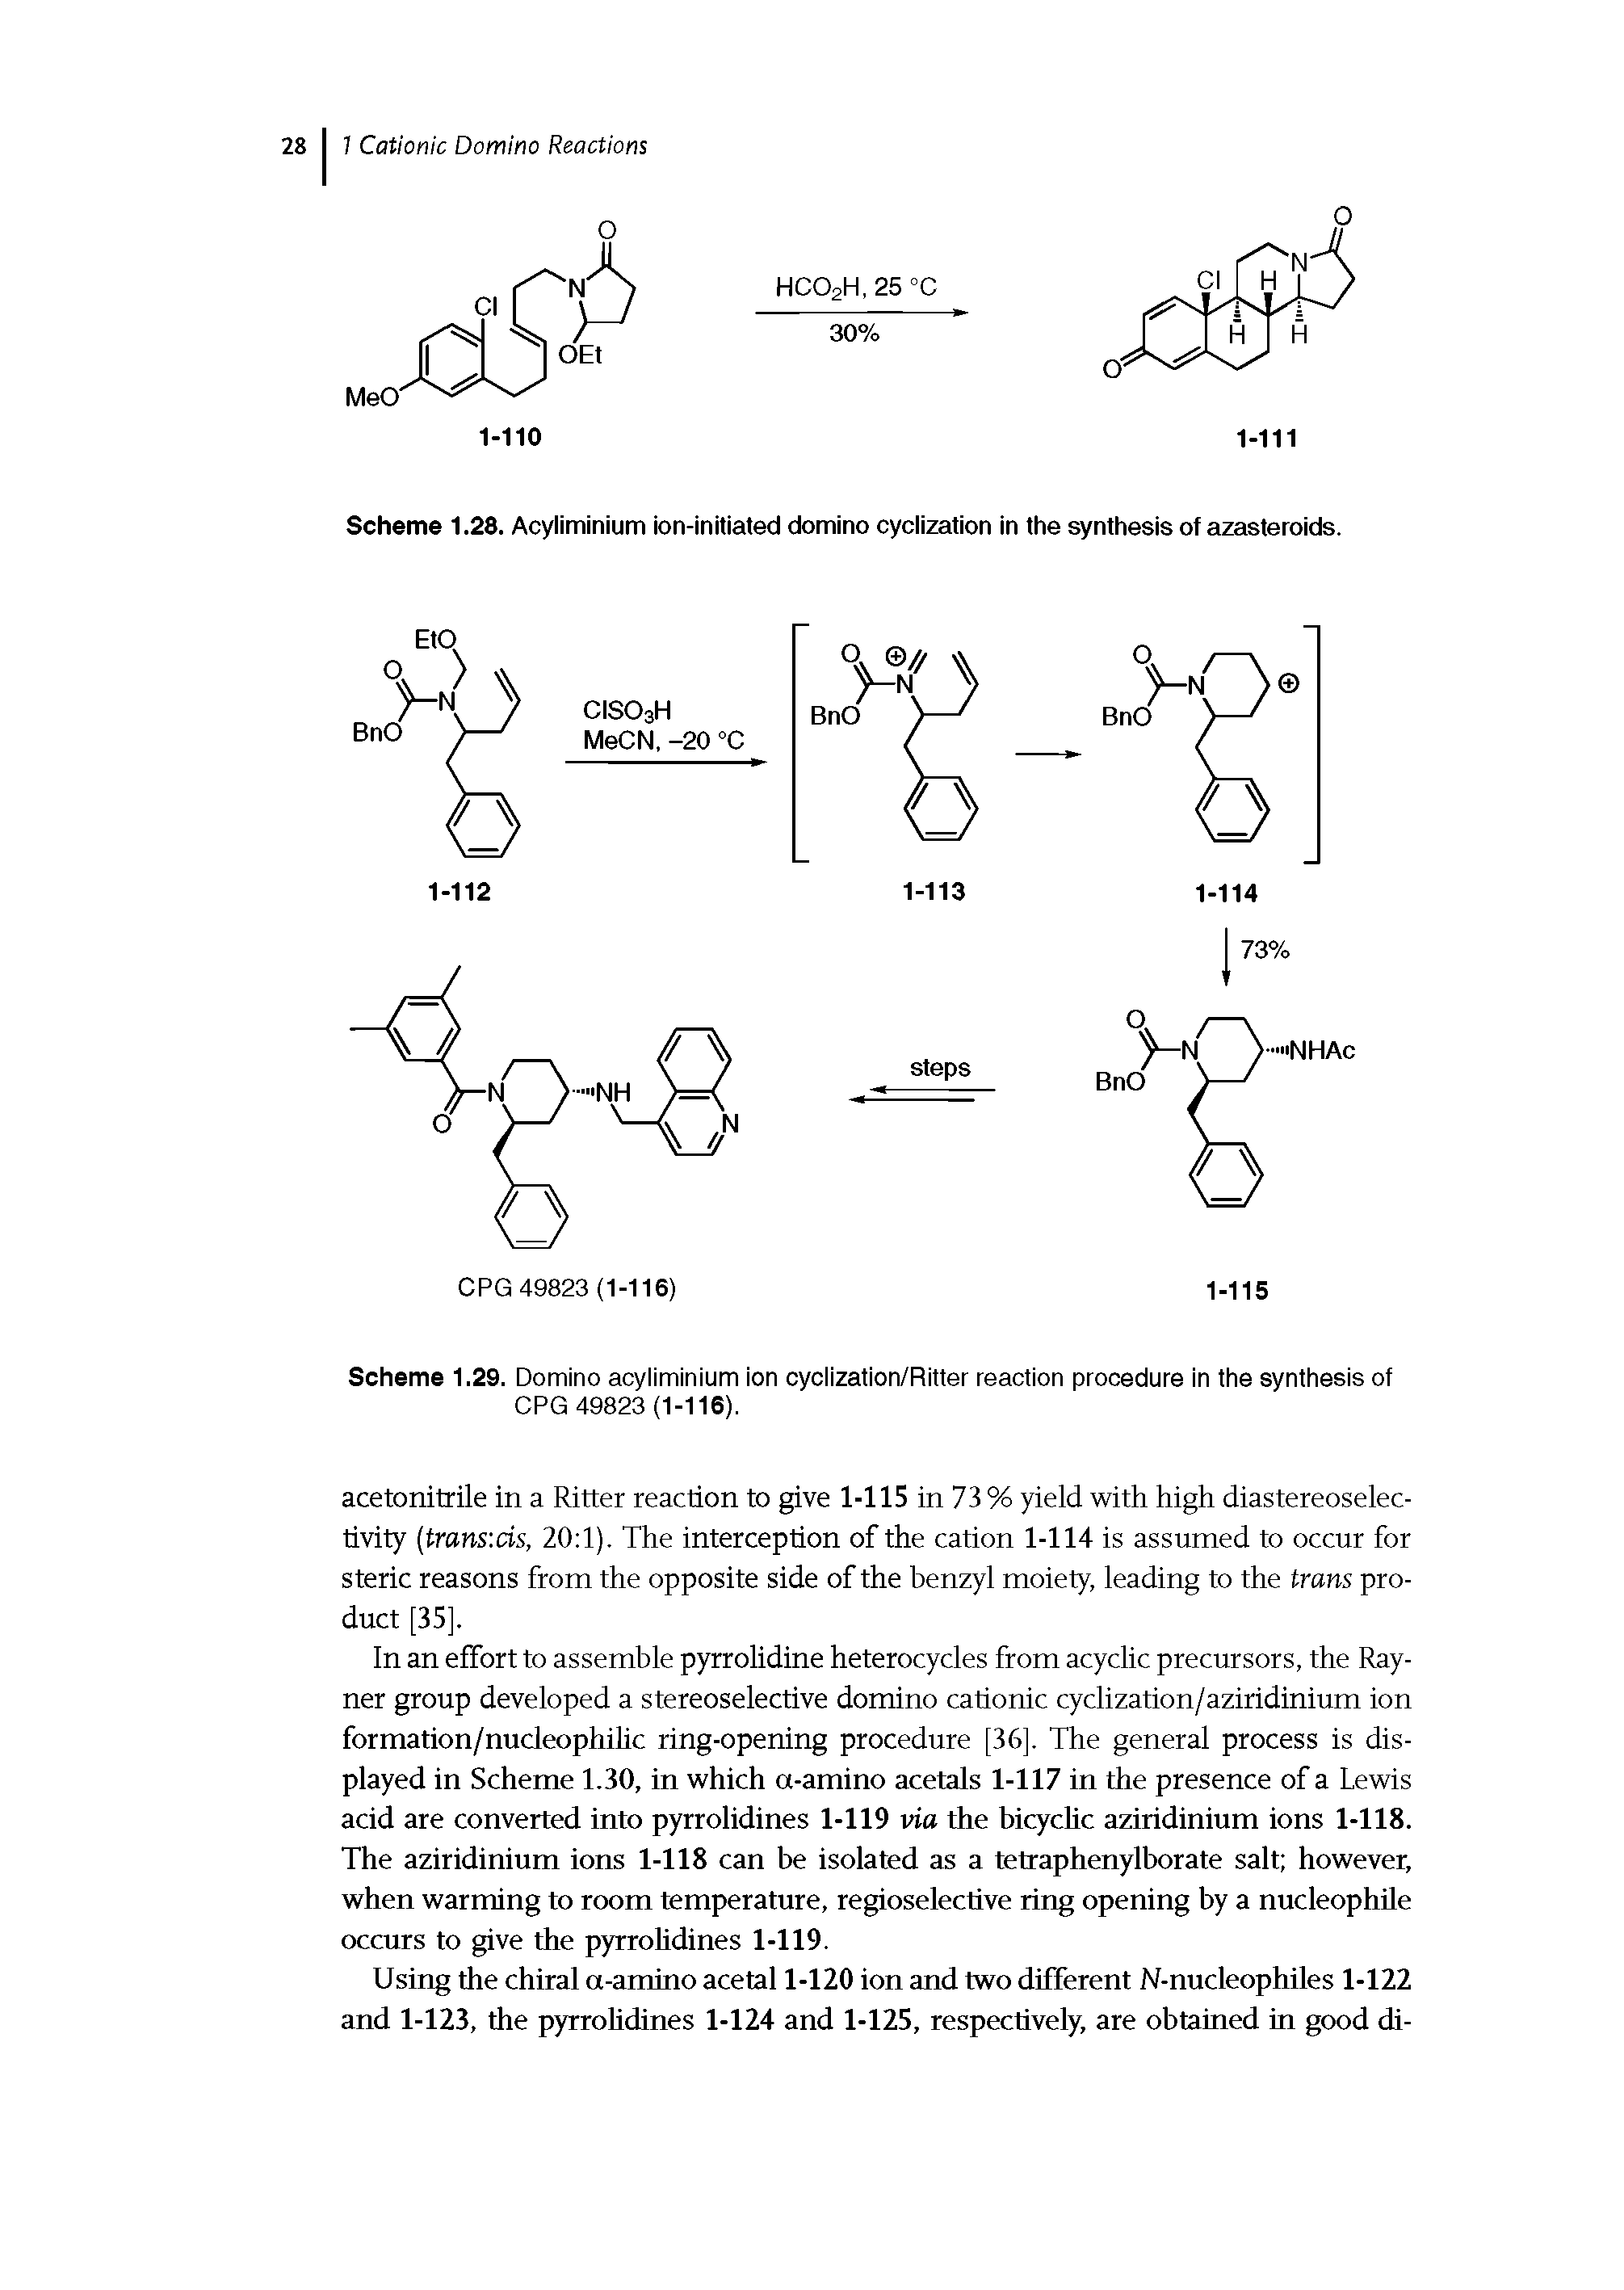 Scheme 1.29. Domino acyliminium ion cyclization/Ritter reaction procedure in the synthesis of CPG 49823 (1-116).